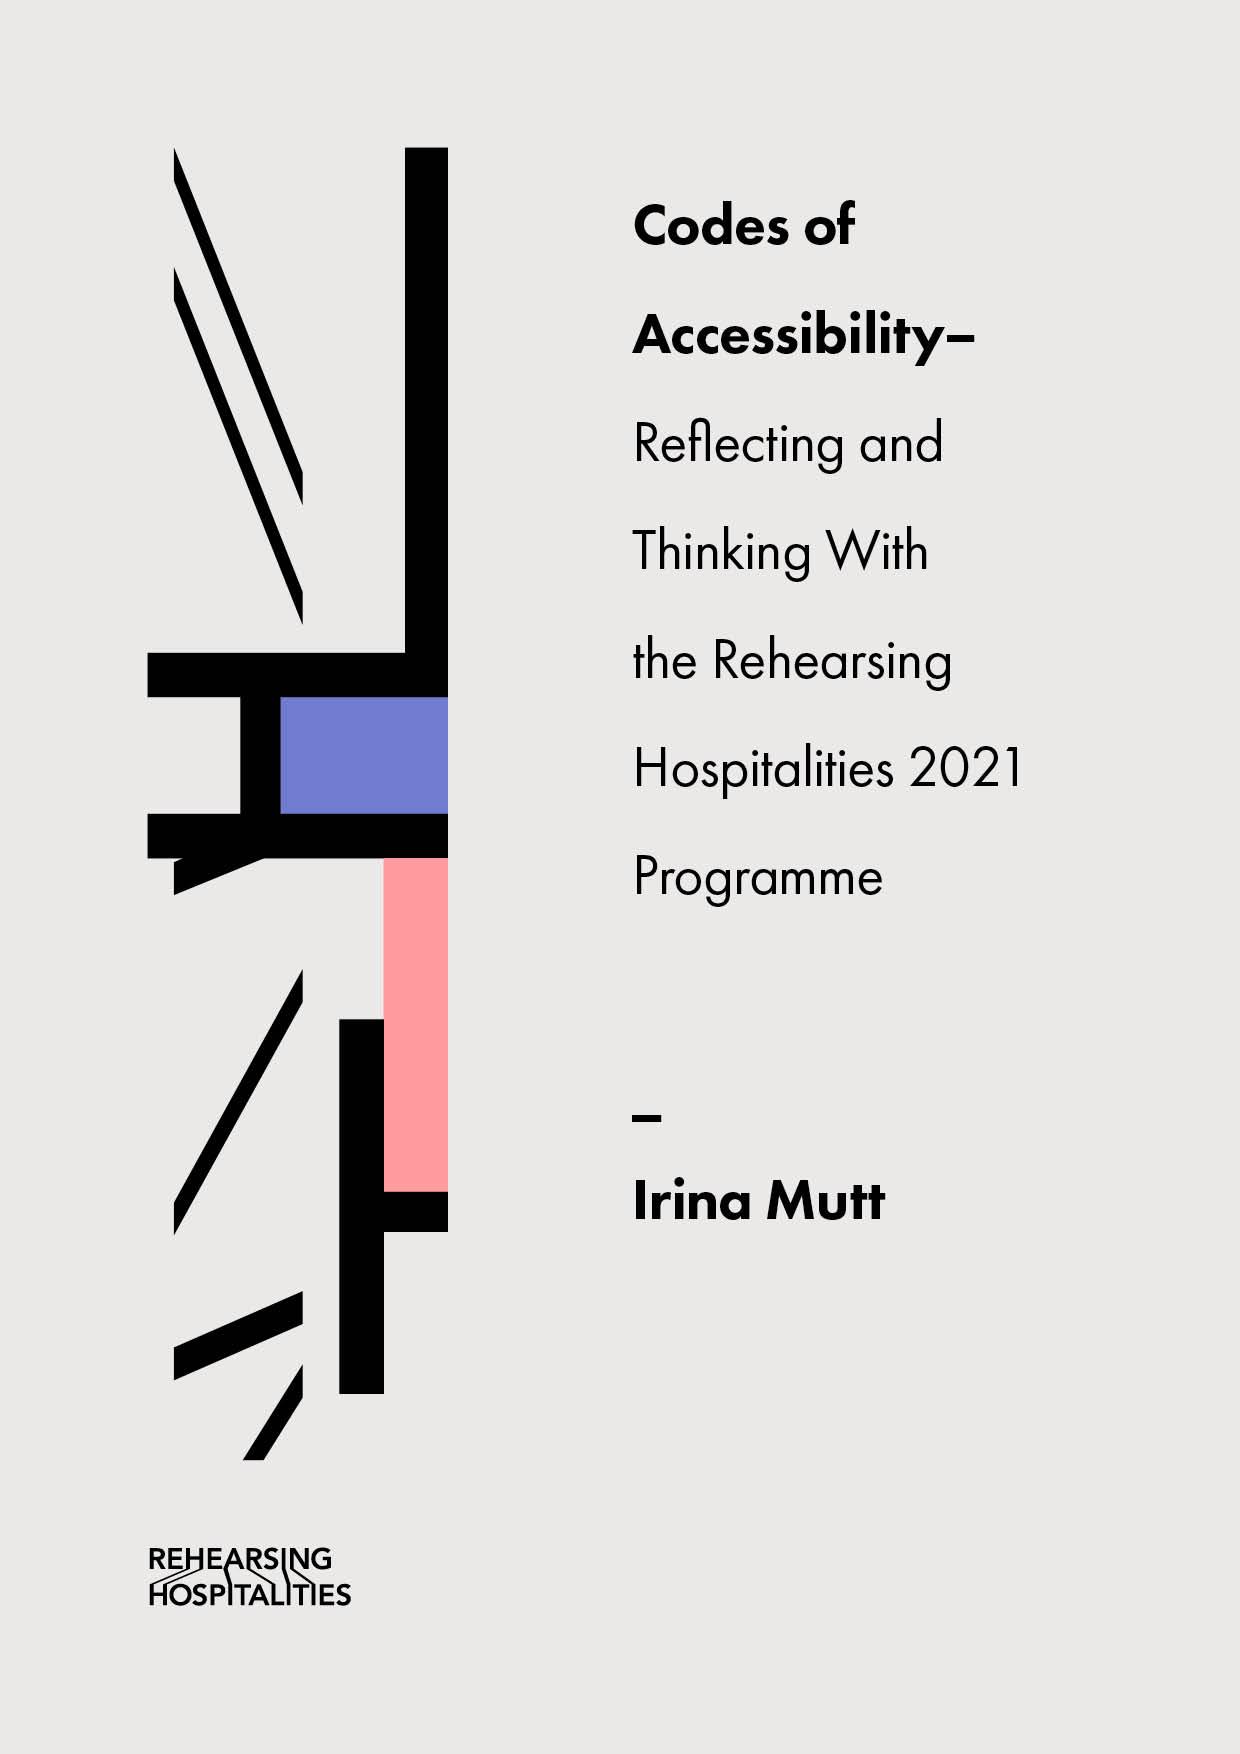 Title Codes of Accessibility—Reflecting and Thinking With the Rehearsing Hospitalities 2021 Programme